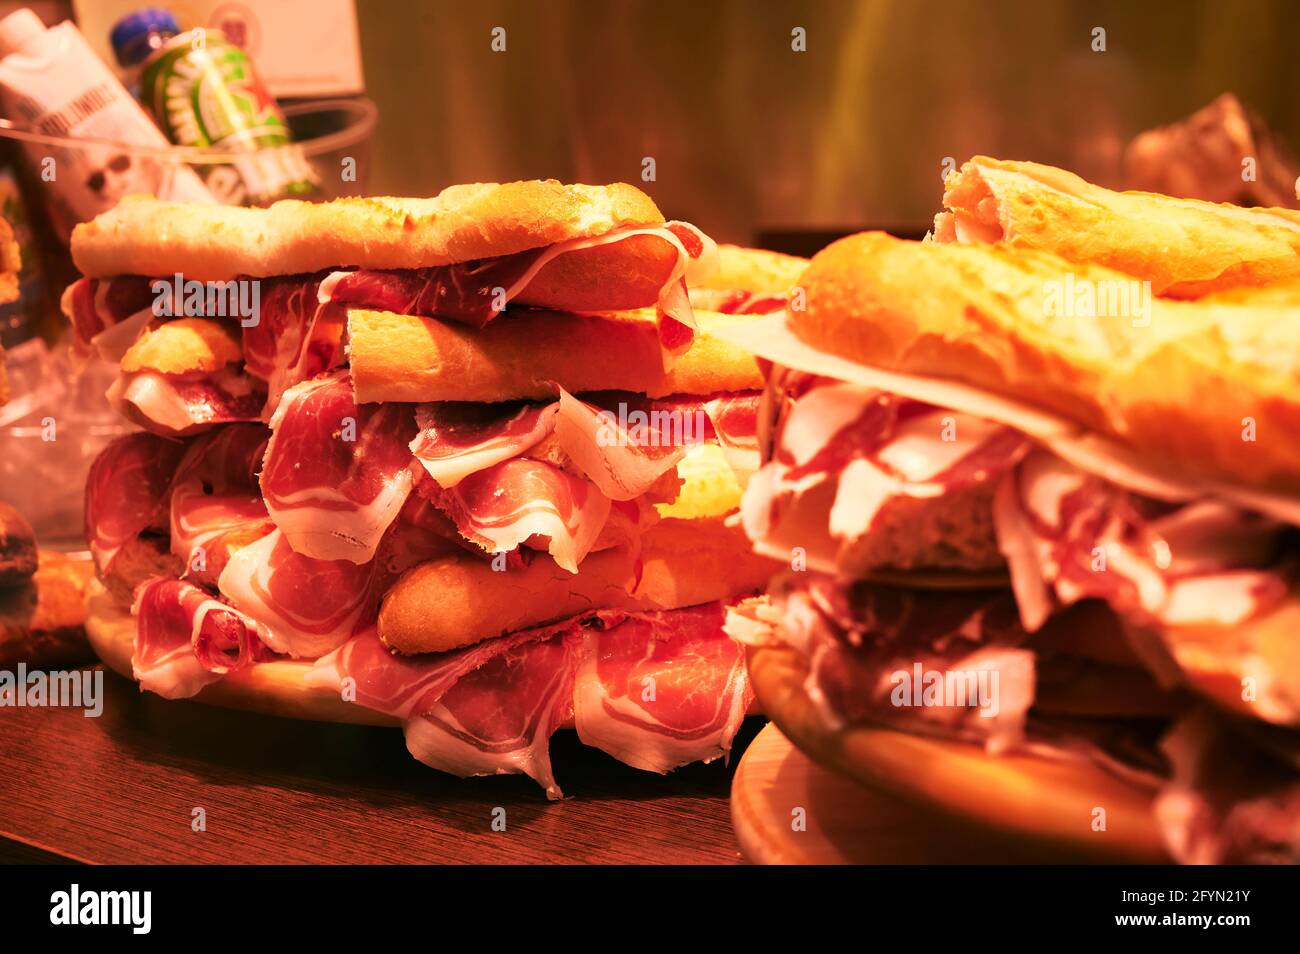 Stack of serrano iberico ham sandwiches on display at a local sandwich shop in Bilbao, Biscay, Basque Country, Spain Stock Photo